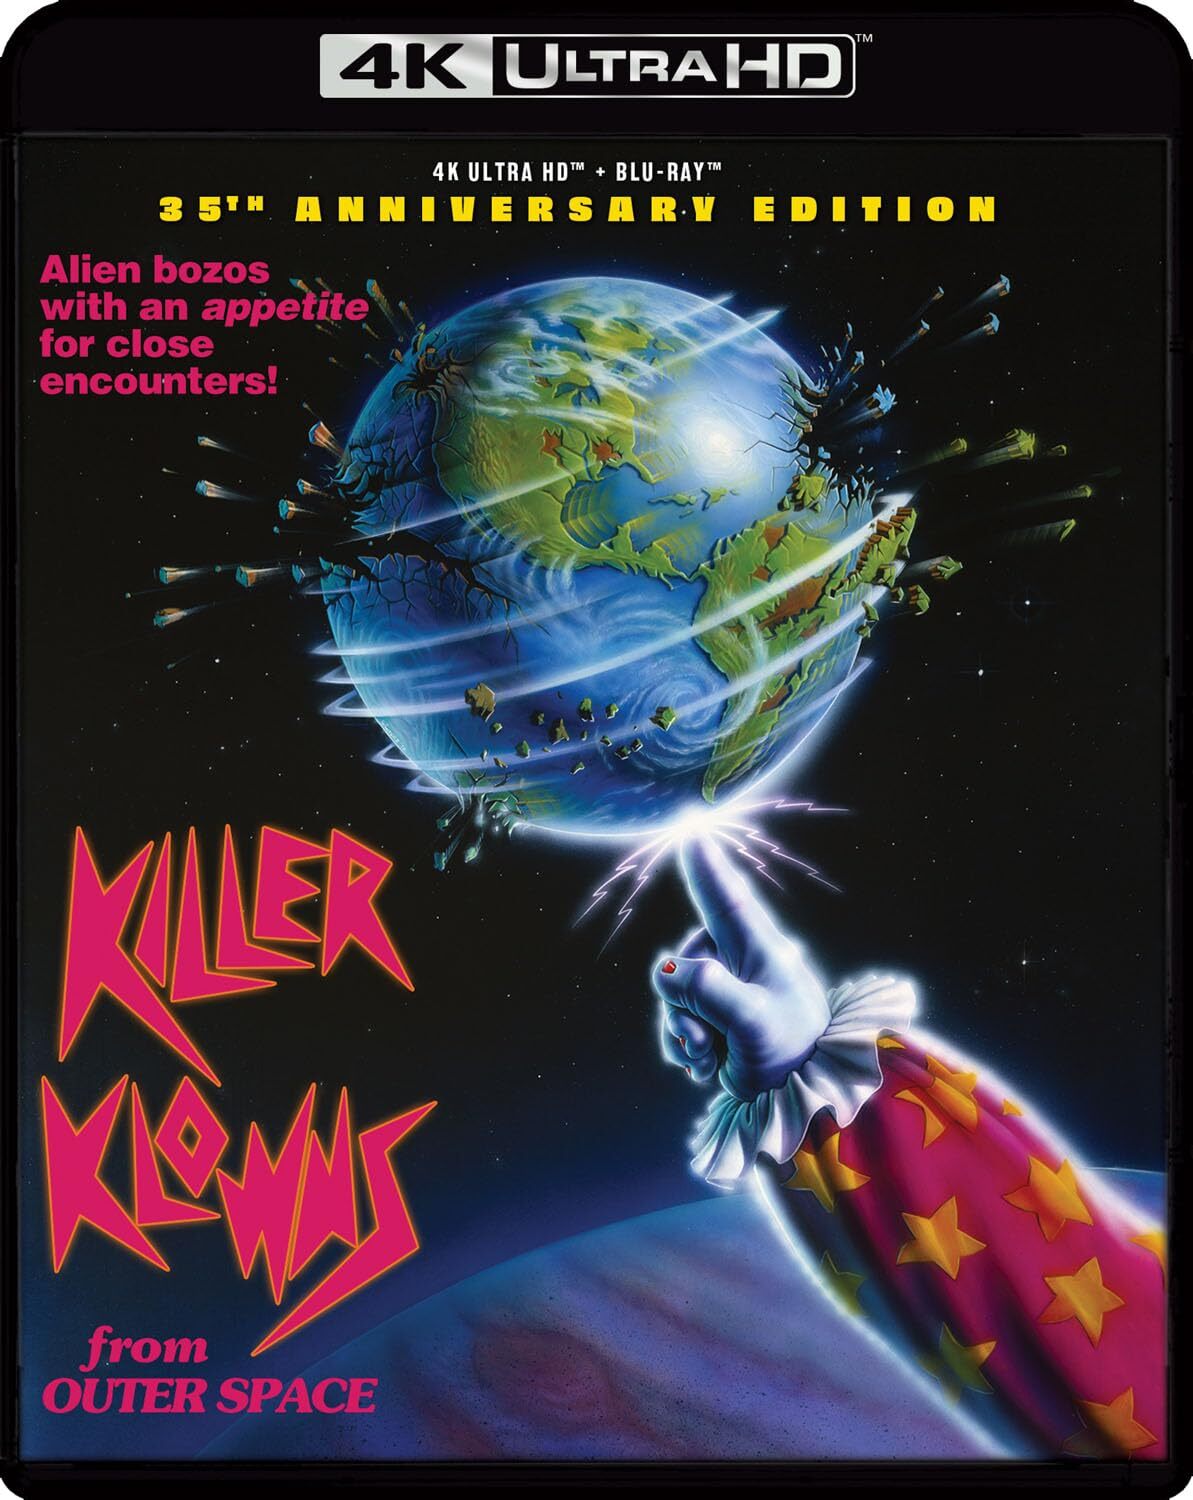 KILLER KLOWNS FROM OUTER SPACE 4K UHD/BLU-RAY [PRE-ORDER]